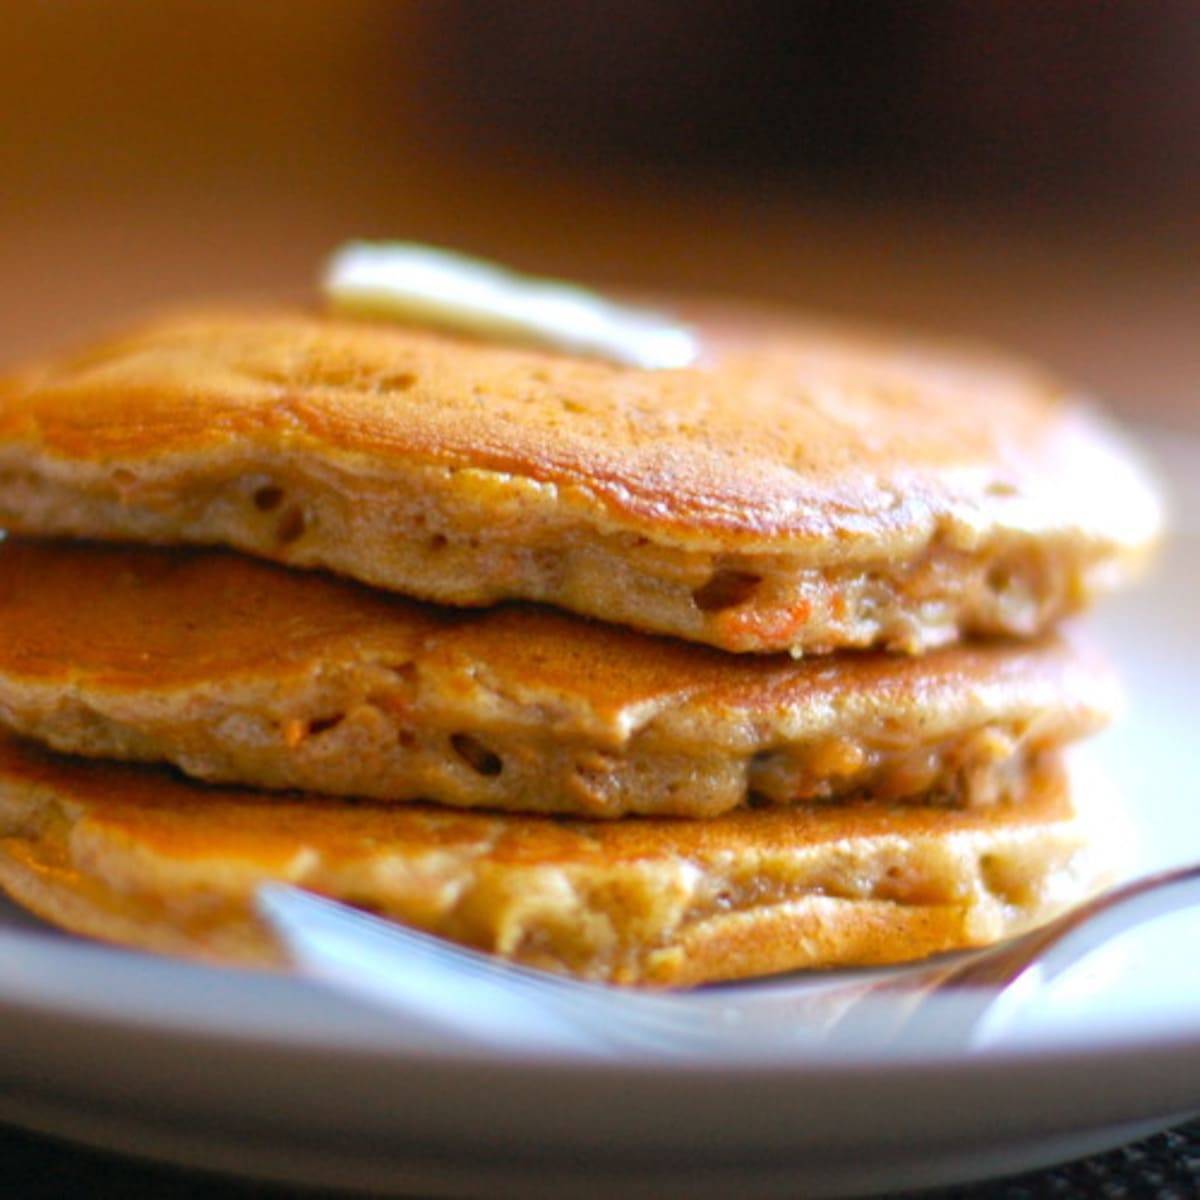 Cinnamon apple carrot pancakes with butter on a plate with a fork.